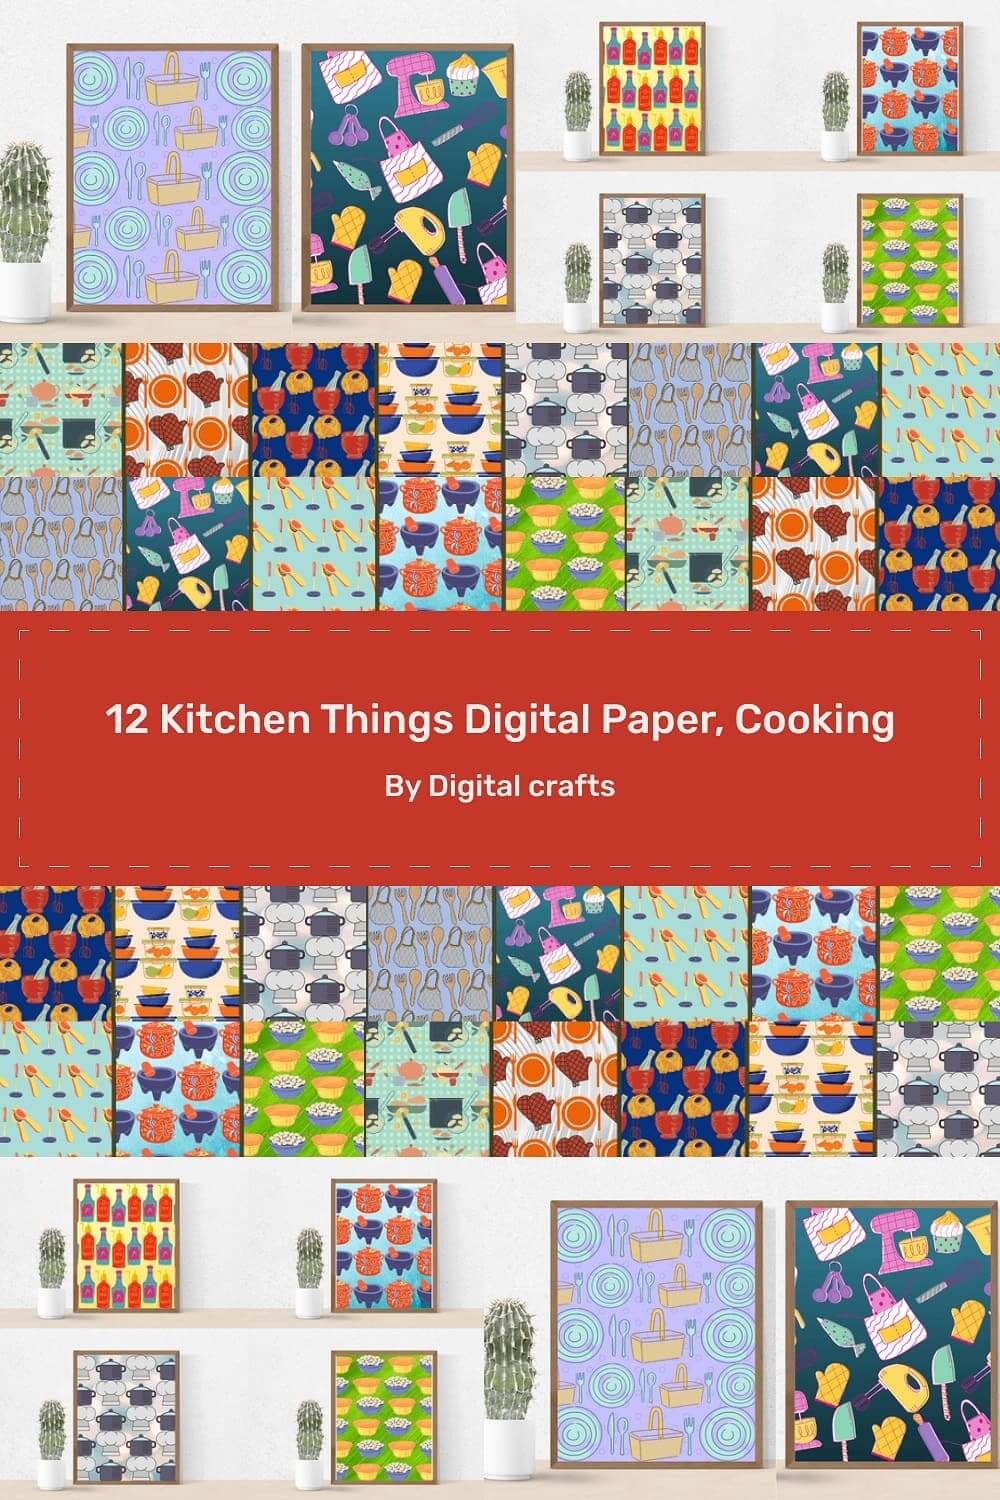 Kitchen patterns in blue, red and orange colors.